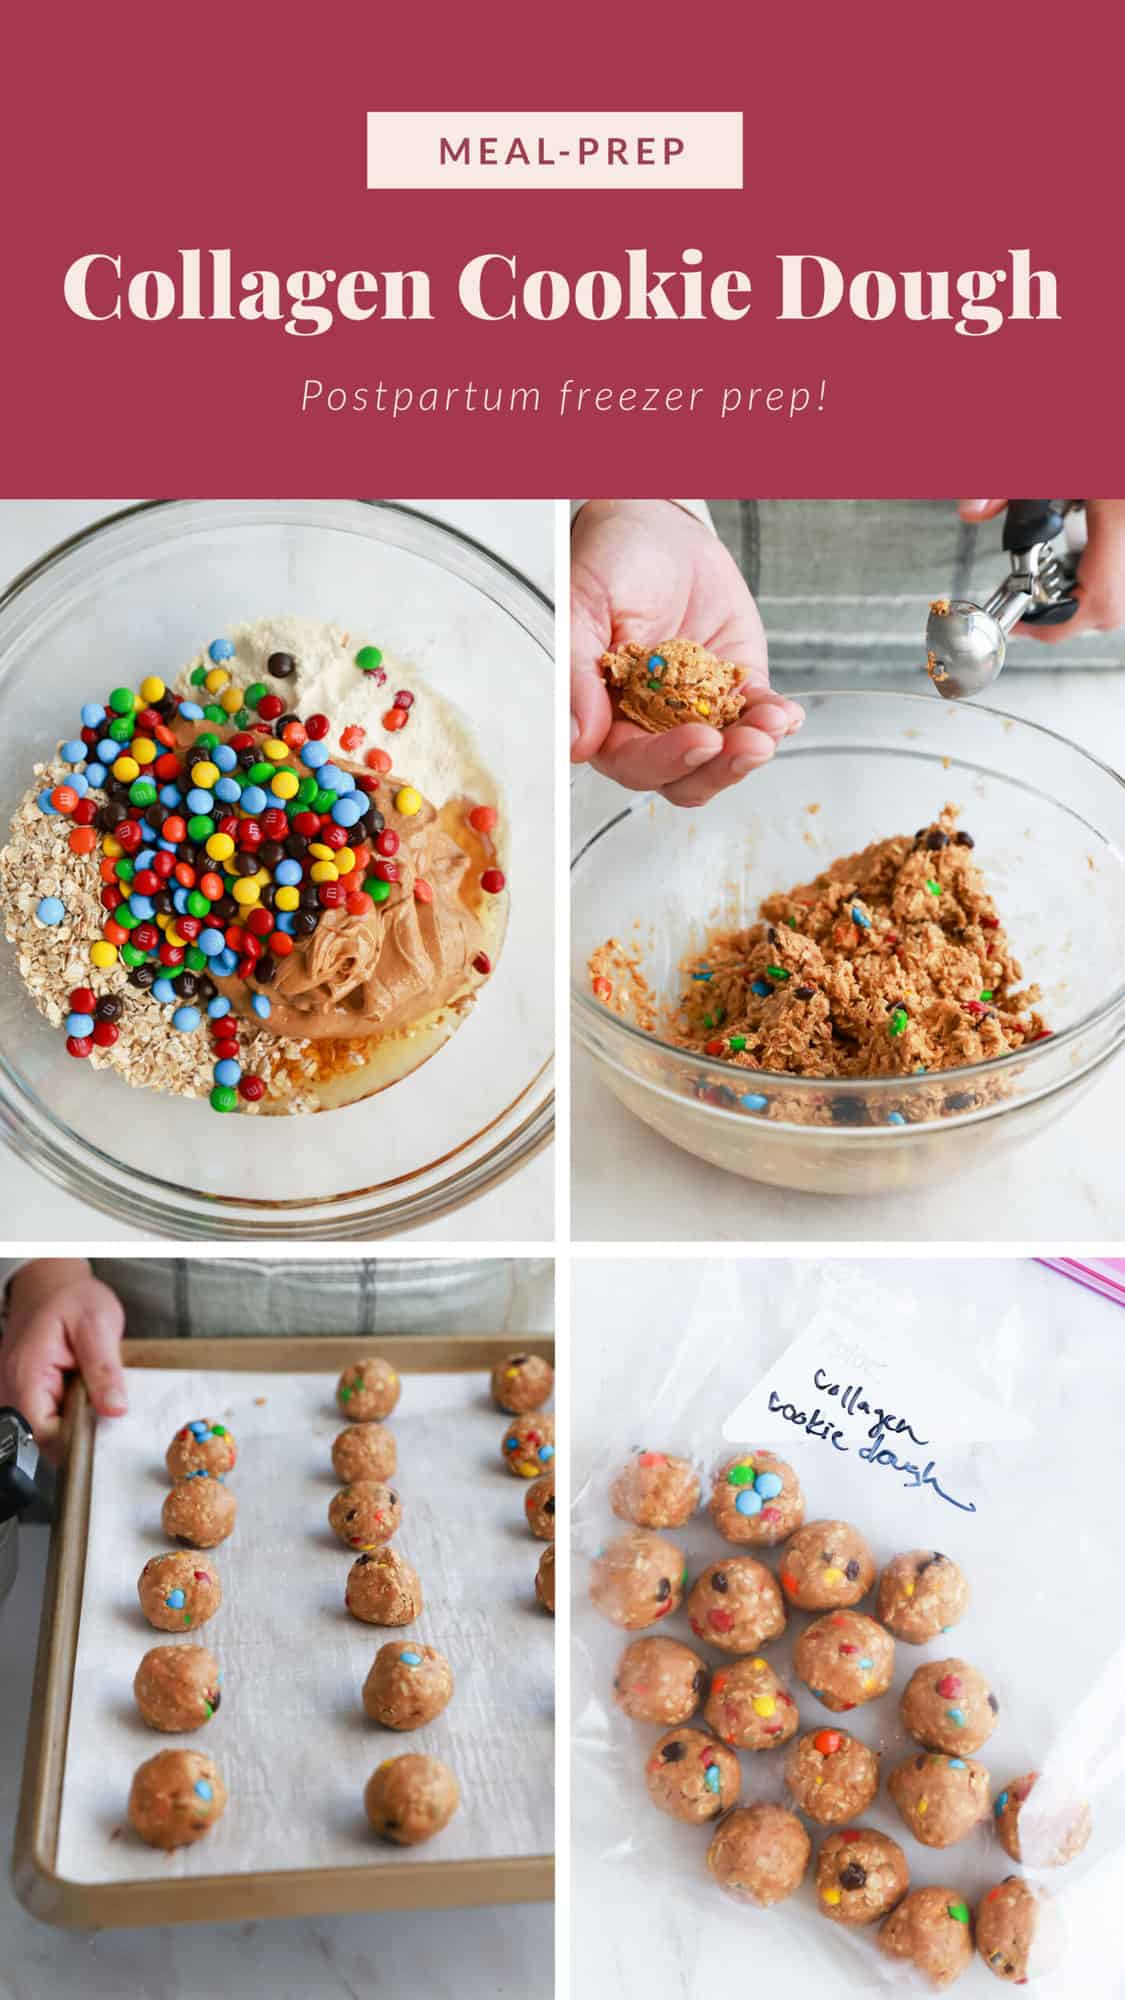 Pictures of a recipe for collagen cookie dough.